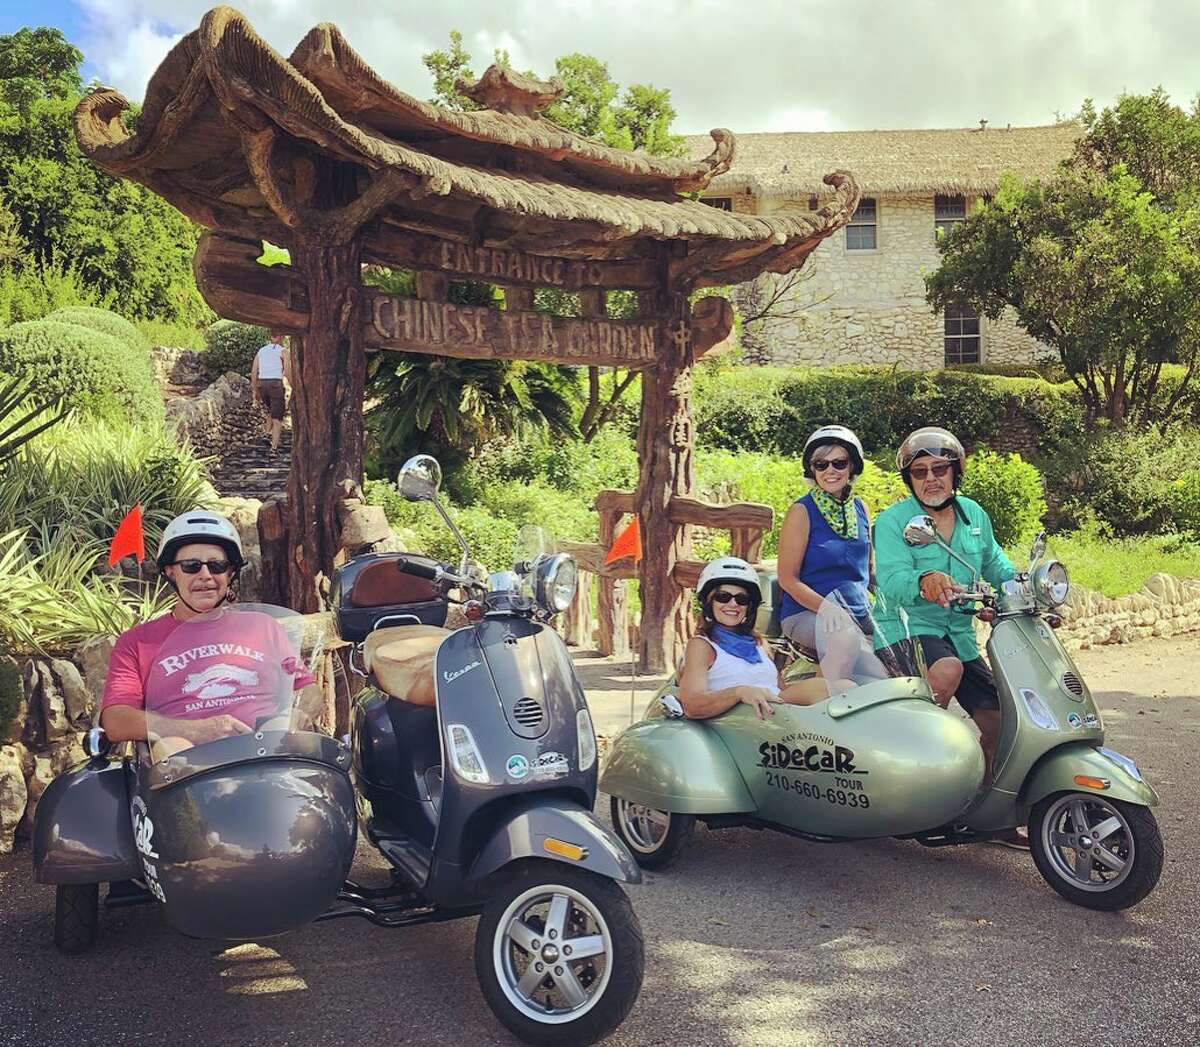 San Antonio Sidecar Tours hit the streets in July, taking residents and visitors coming in from as far as Kuwait around some of the city's must-sees via a seat in a sidecar attached to a Vespa.